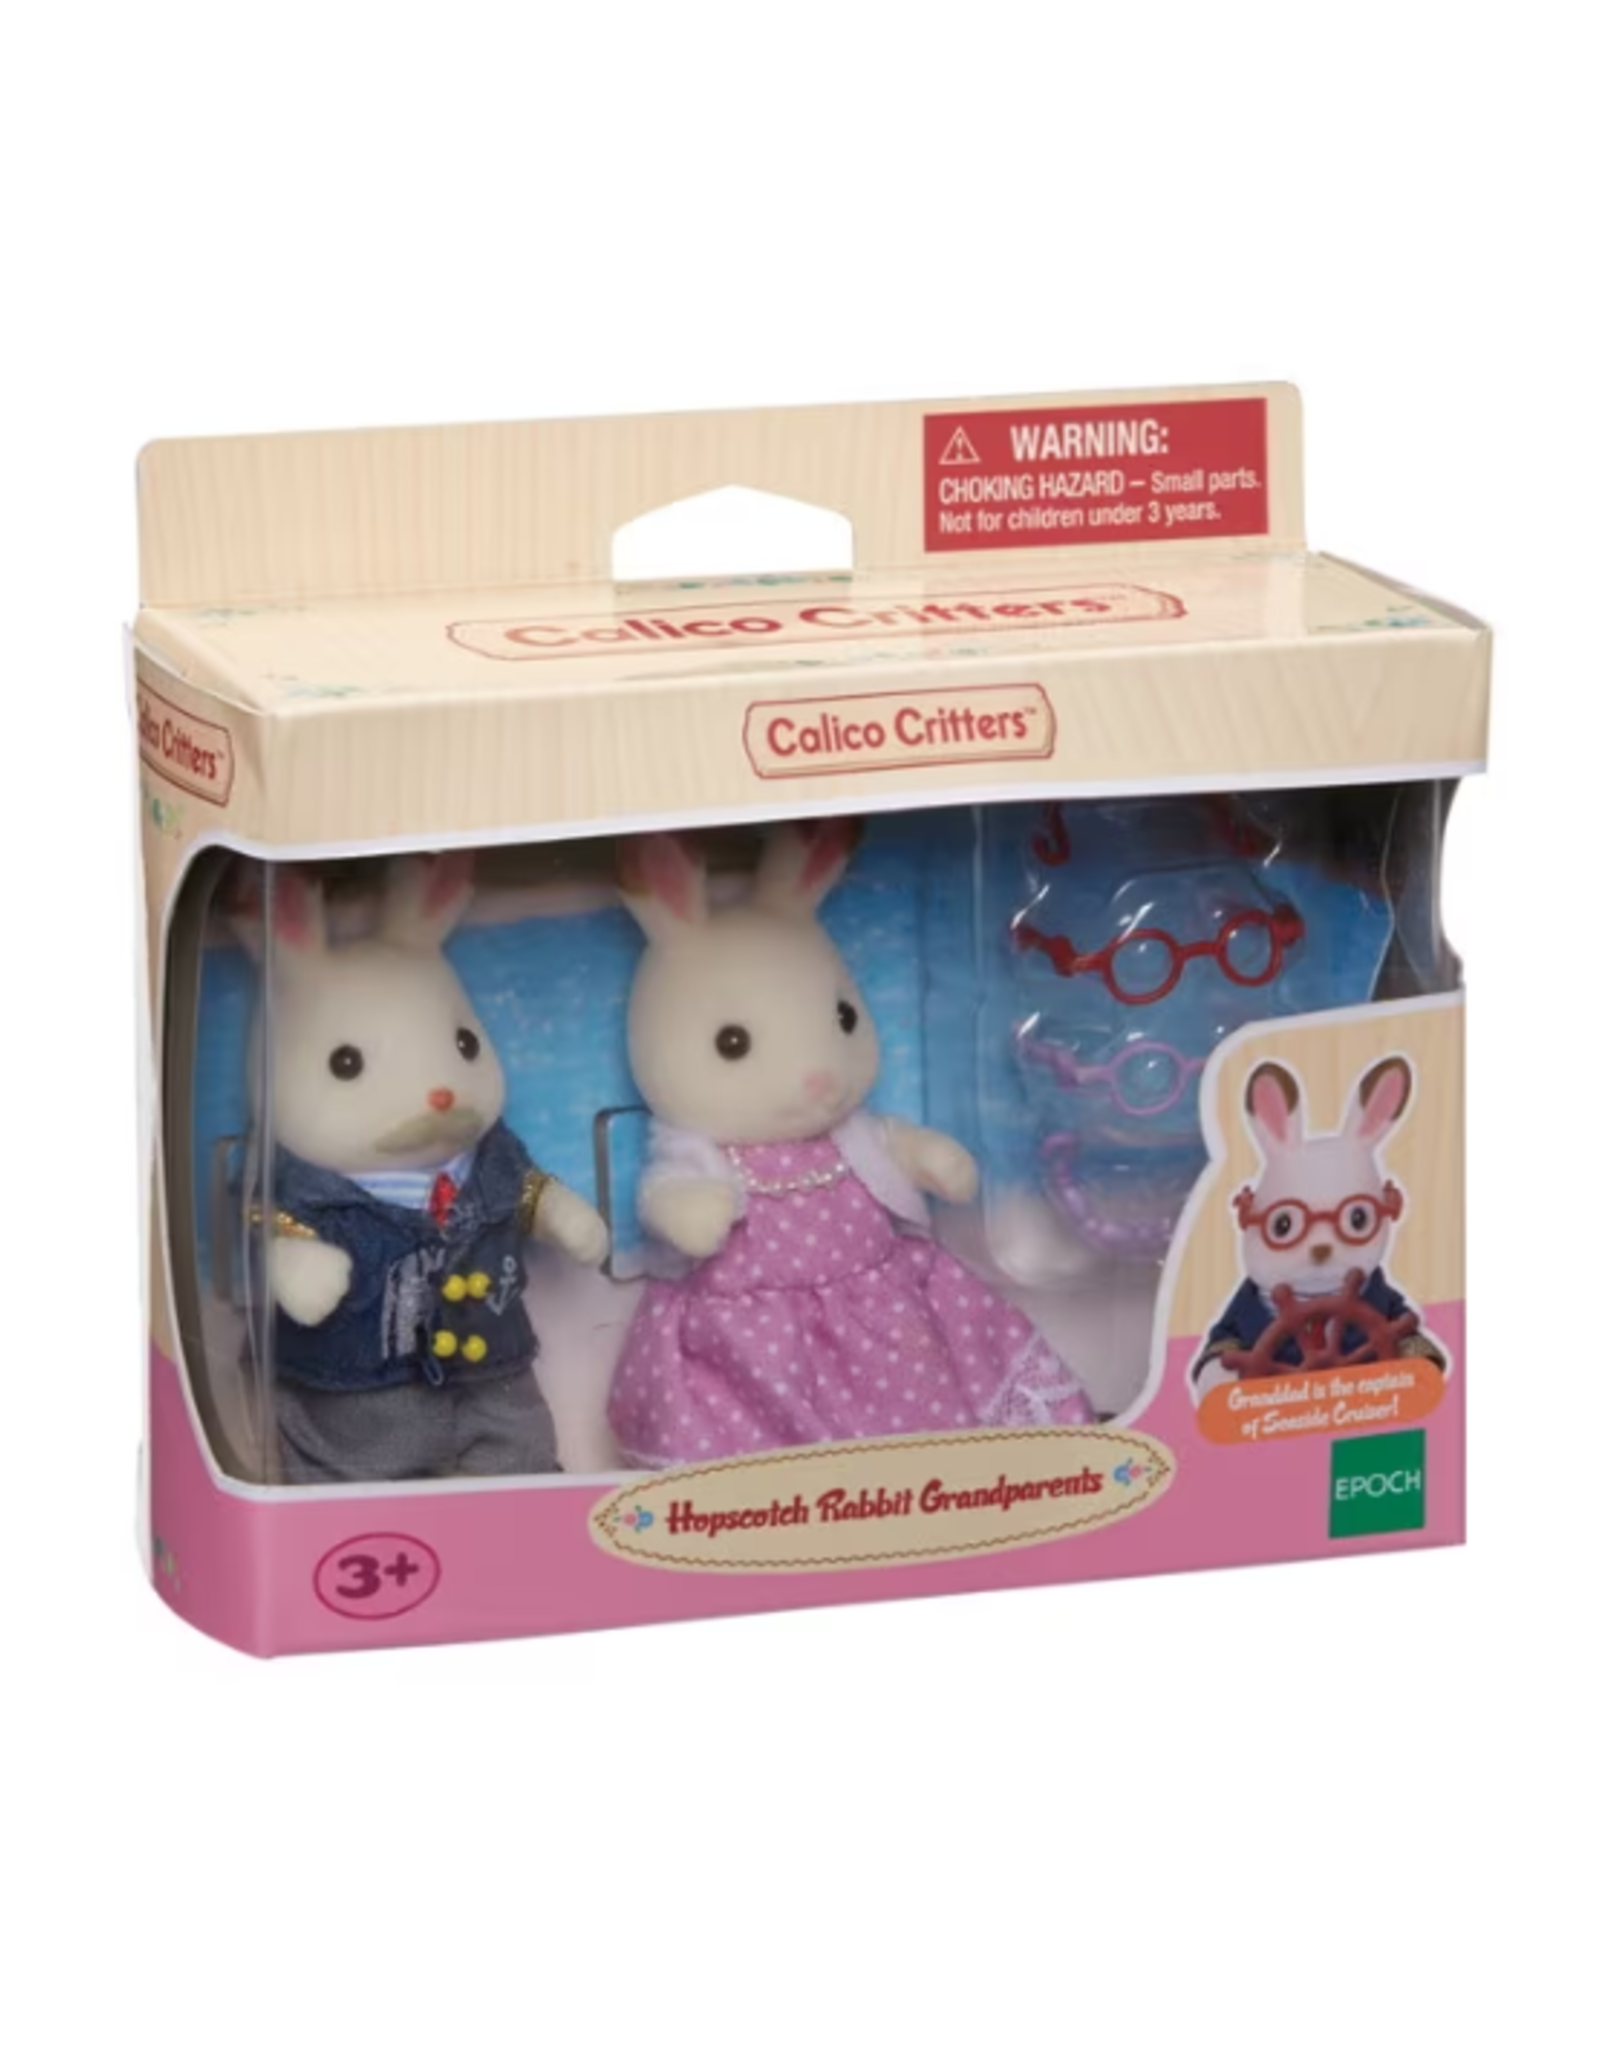 Calico Critters Calico Critters - Chocolate Rabbit Grandparents